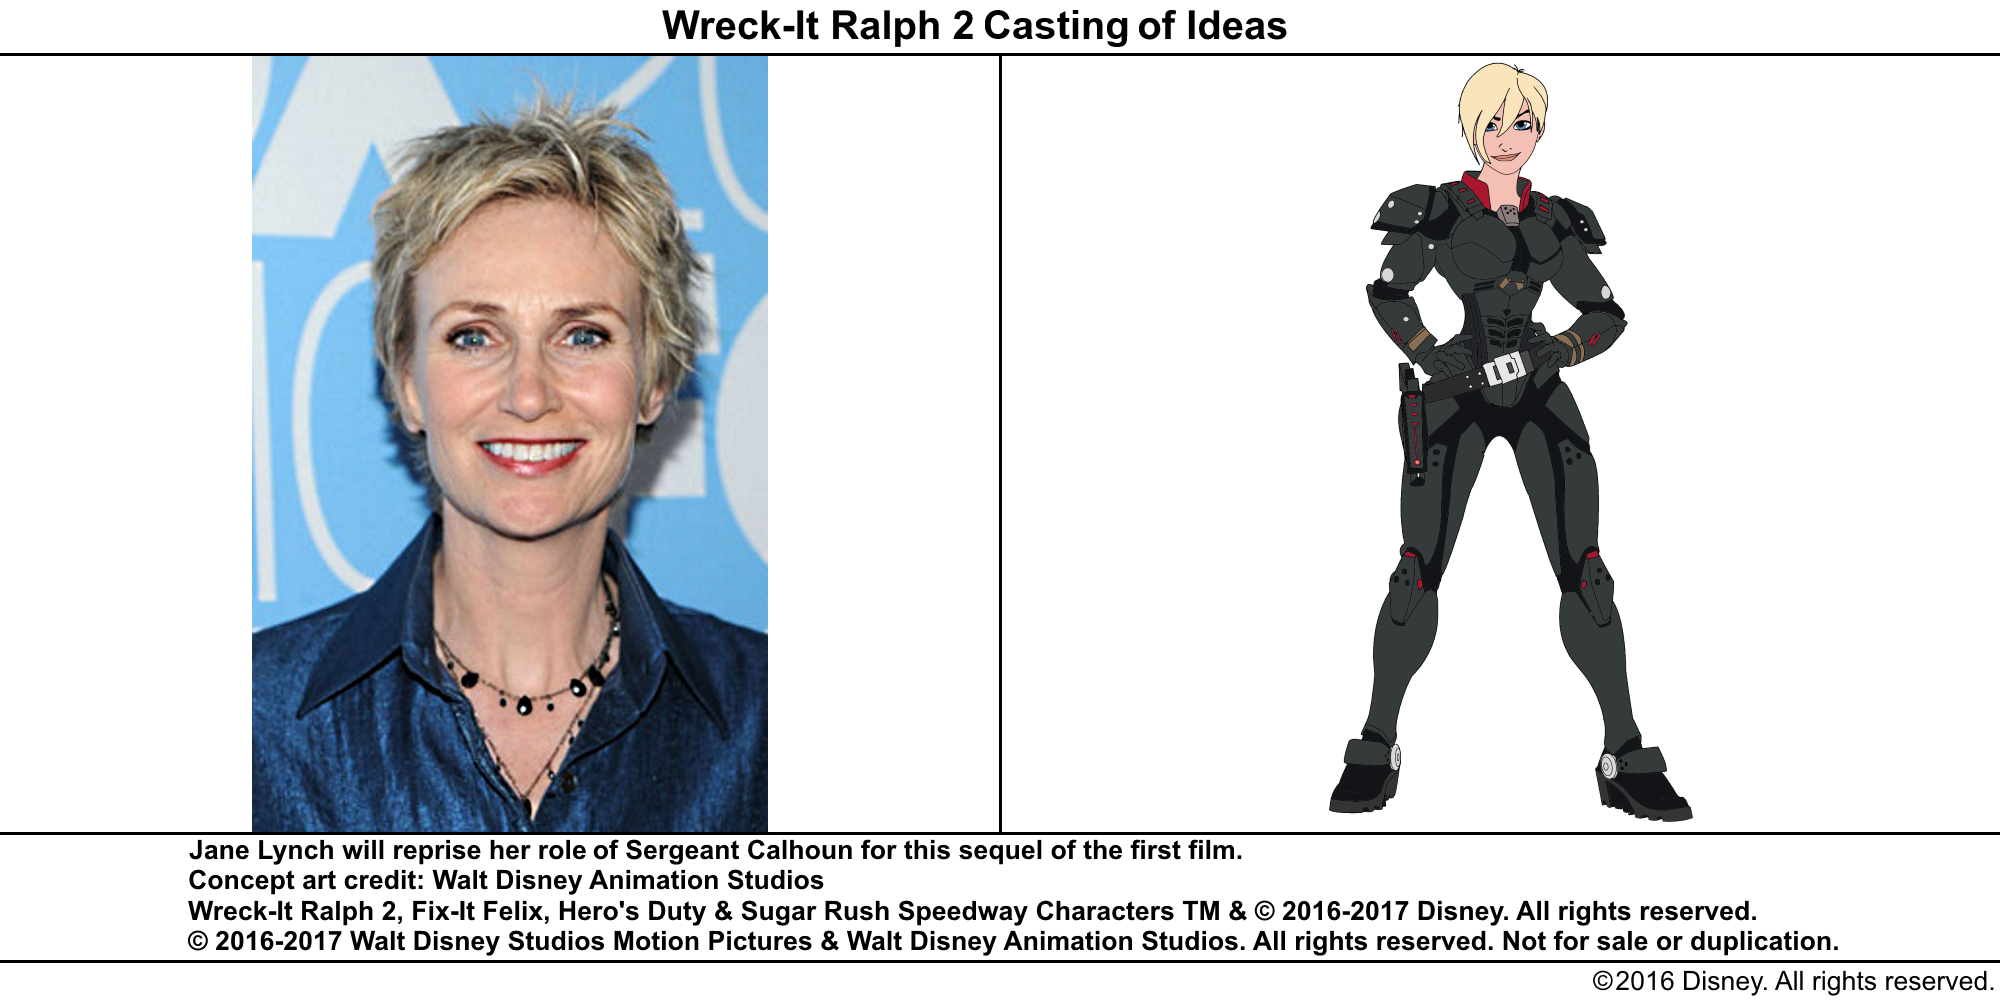 Wreck-It Ralph 2 Casting of Ideas: Jane Lynch - Wreck-It Ral